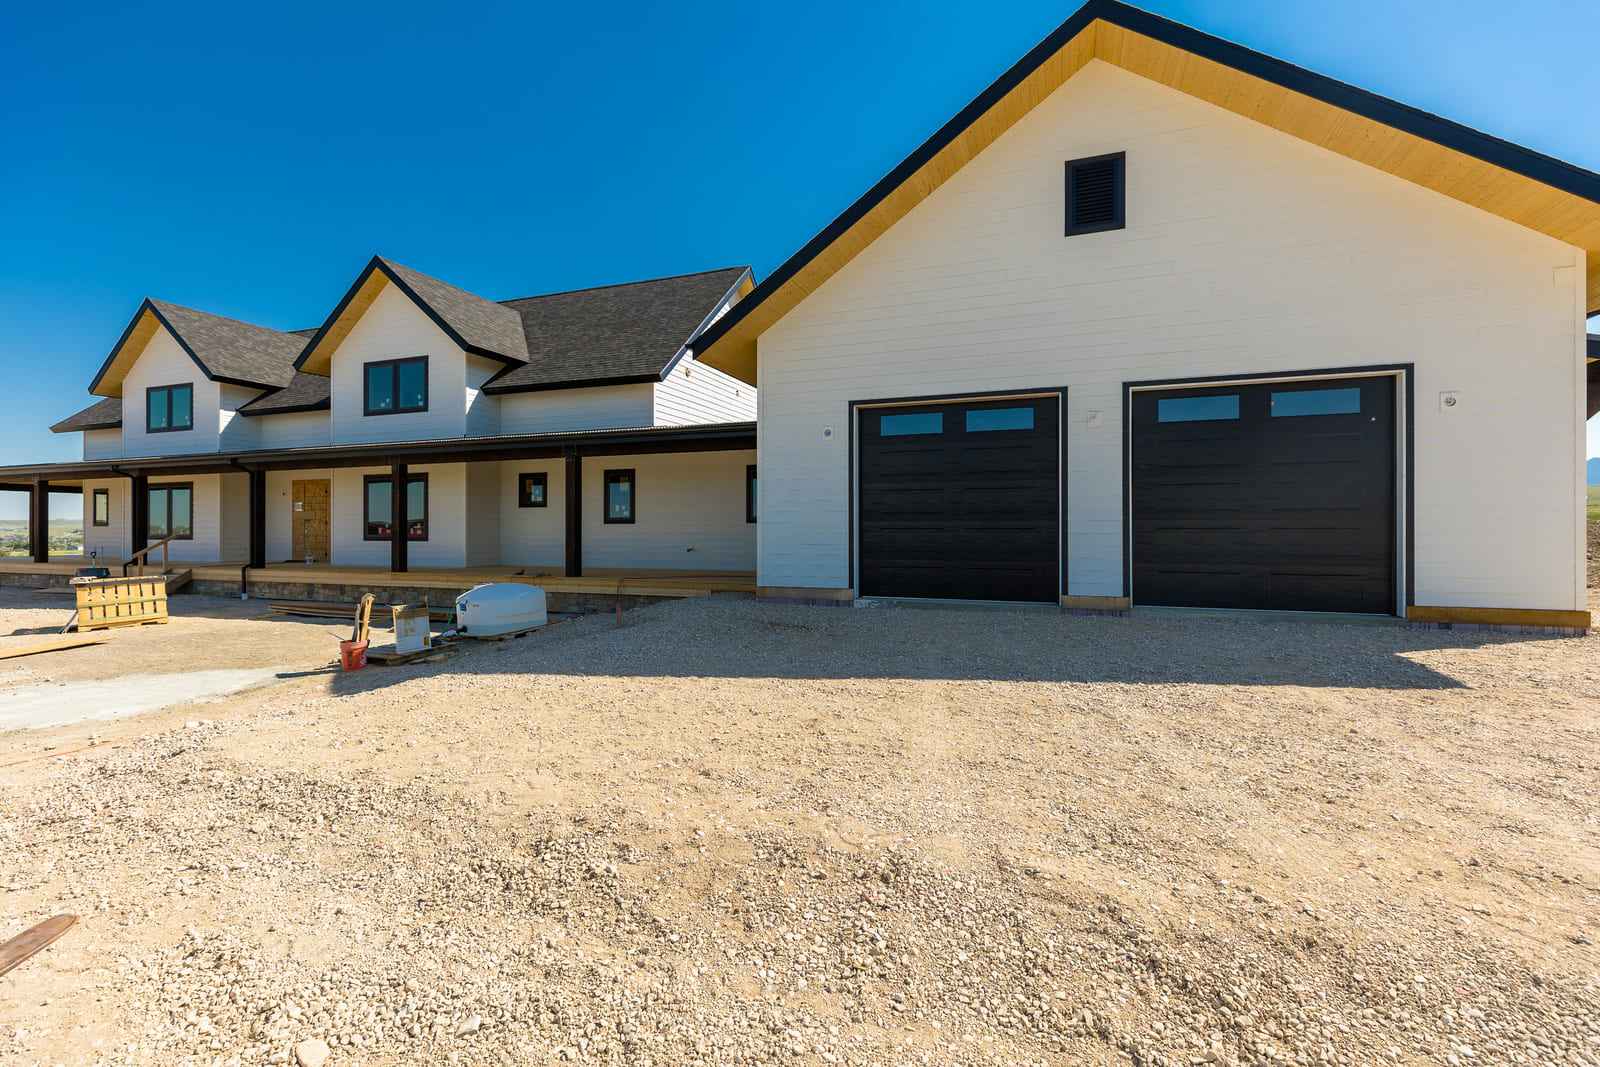 Two-car garage attached to custom home build